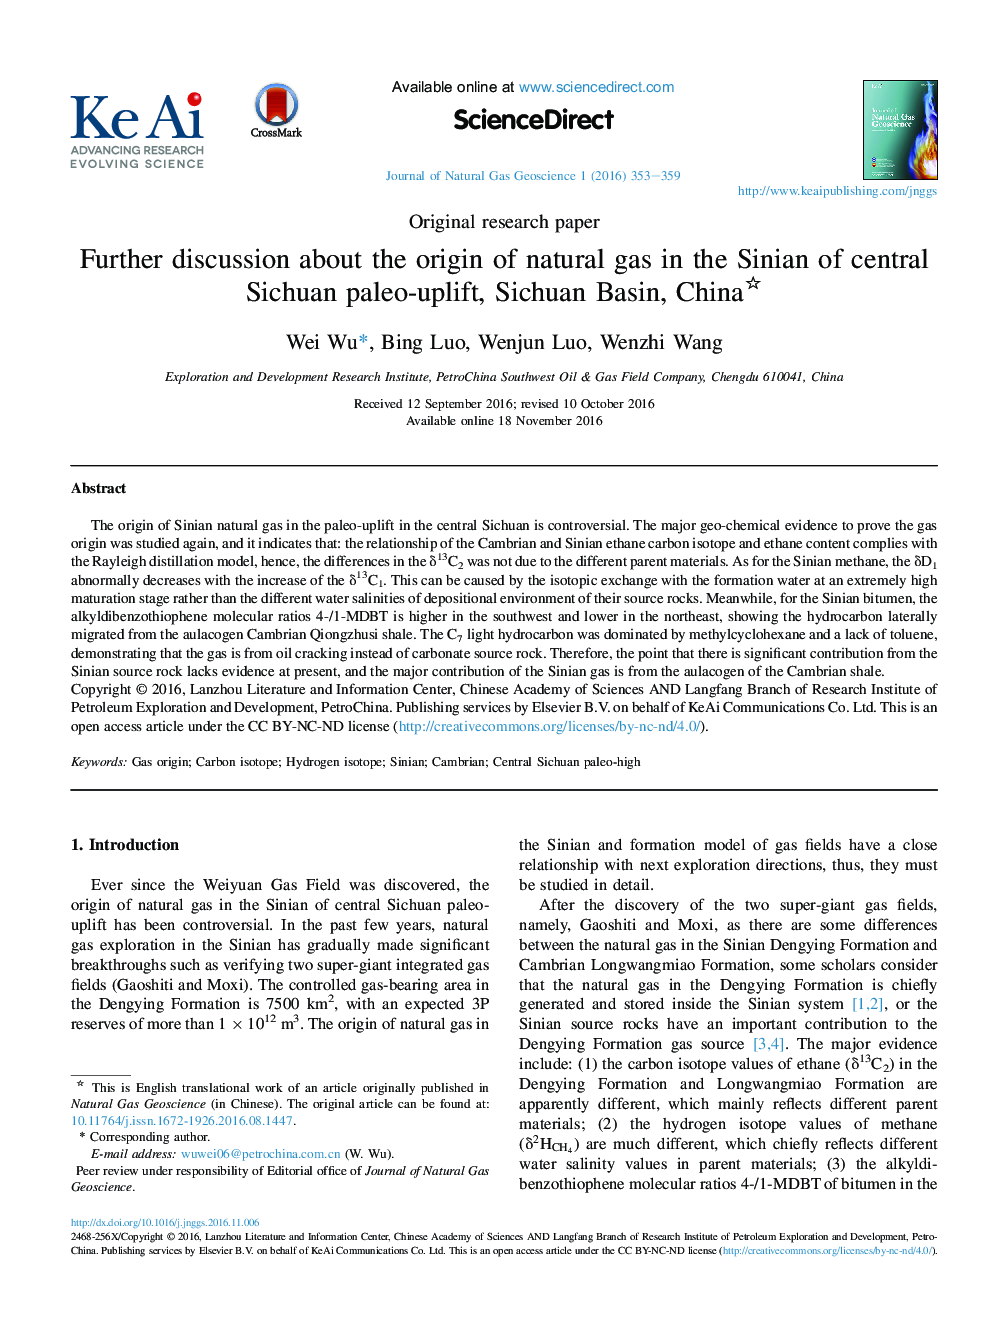 Further discussion about the origin of natural gas in the Sinian of central Sichuan paleo-uplift, Sichuan Basin, China